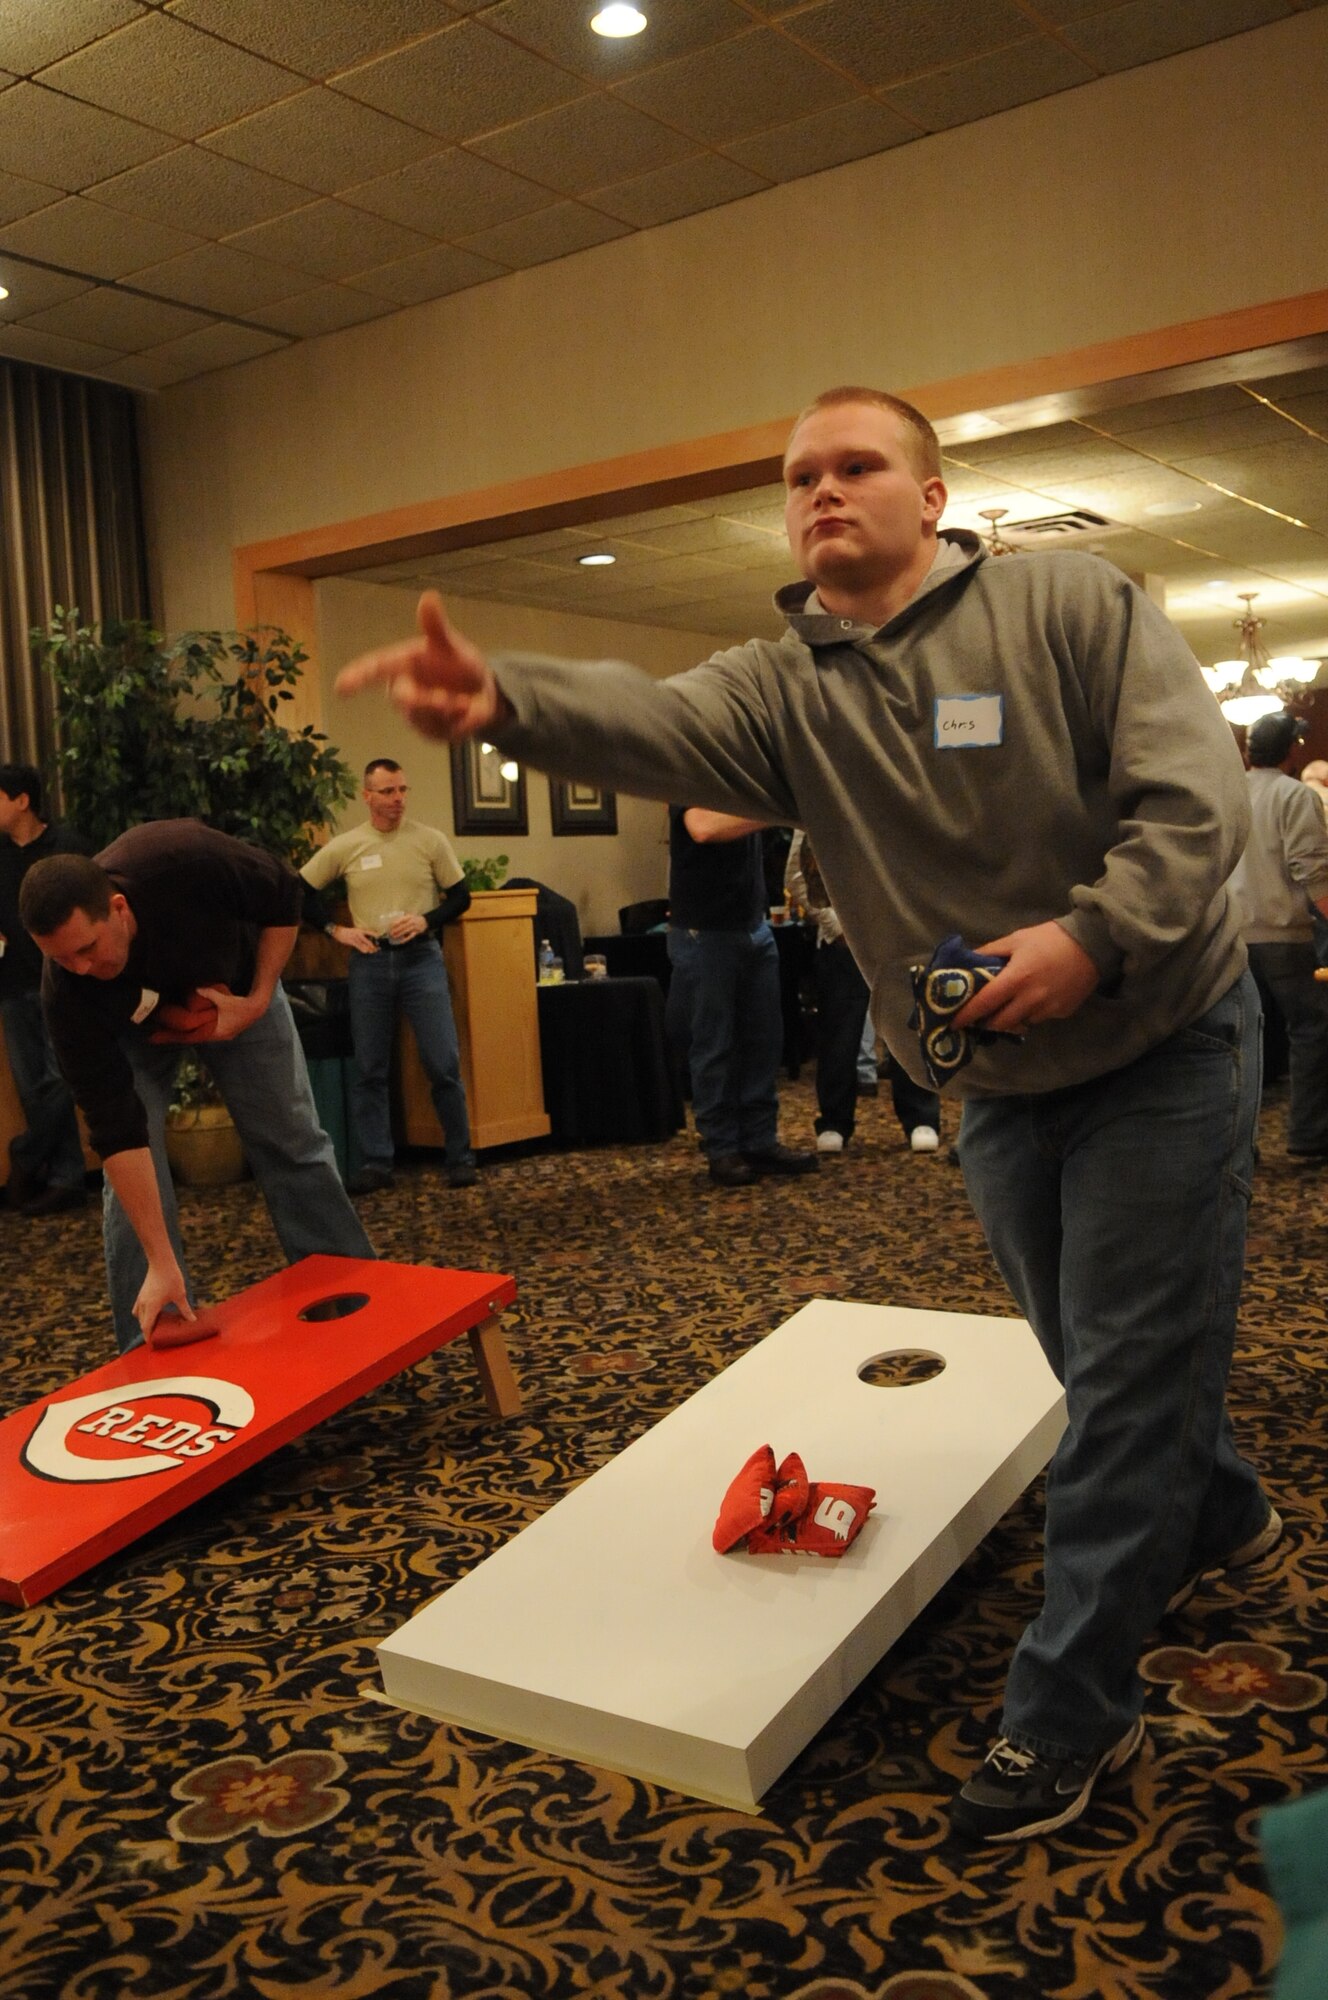 MINOT AIR FORCE BASE, N.D. – Airman 1st Class Chris Buchfink, an aircraft structural maintenance technician with the 5th Maintenance Squadron, tosses a bean bag during a game of corn hole at the 46th Annual Team Minot Sportsmen Feed held at the Jimmy Doolittle Center here Jan. 23. The annual event brings Minot’s Airmen and members of the local community together for food, fun and camaraderie. (U.S. Air Force photo/Tech. Sgt. Thomas Dow)